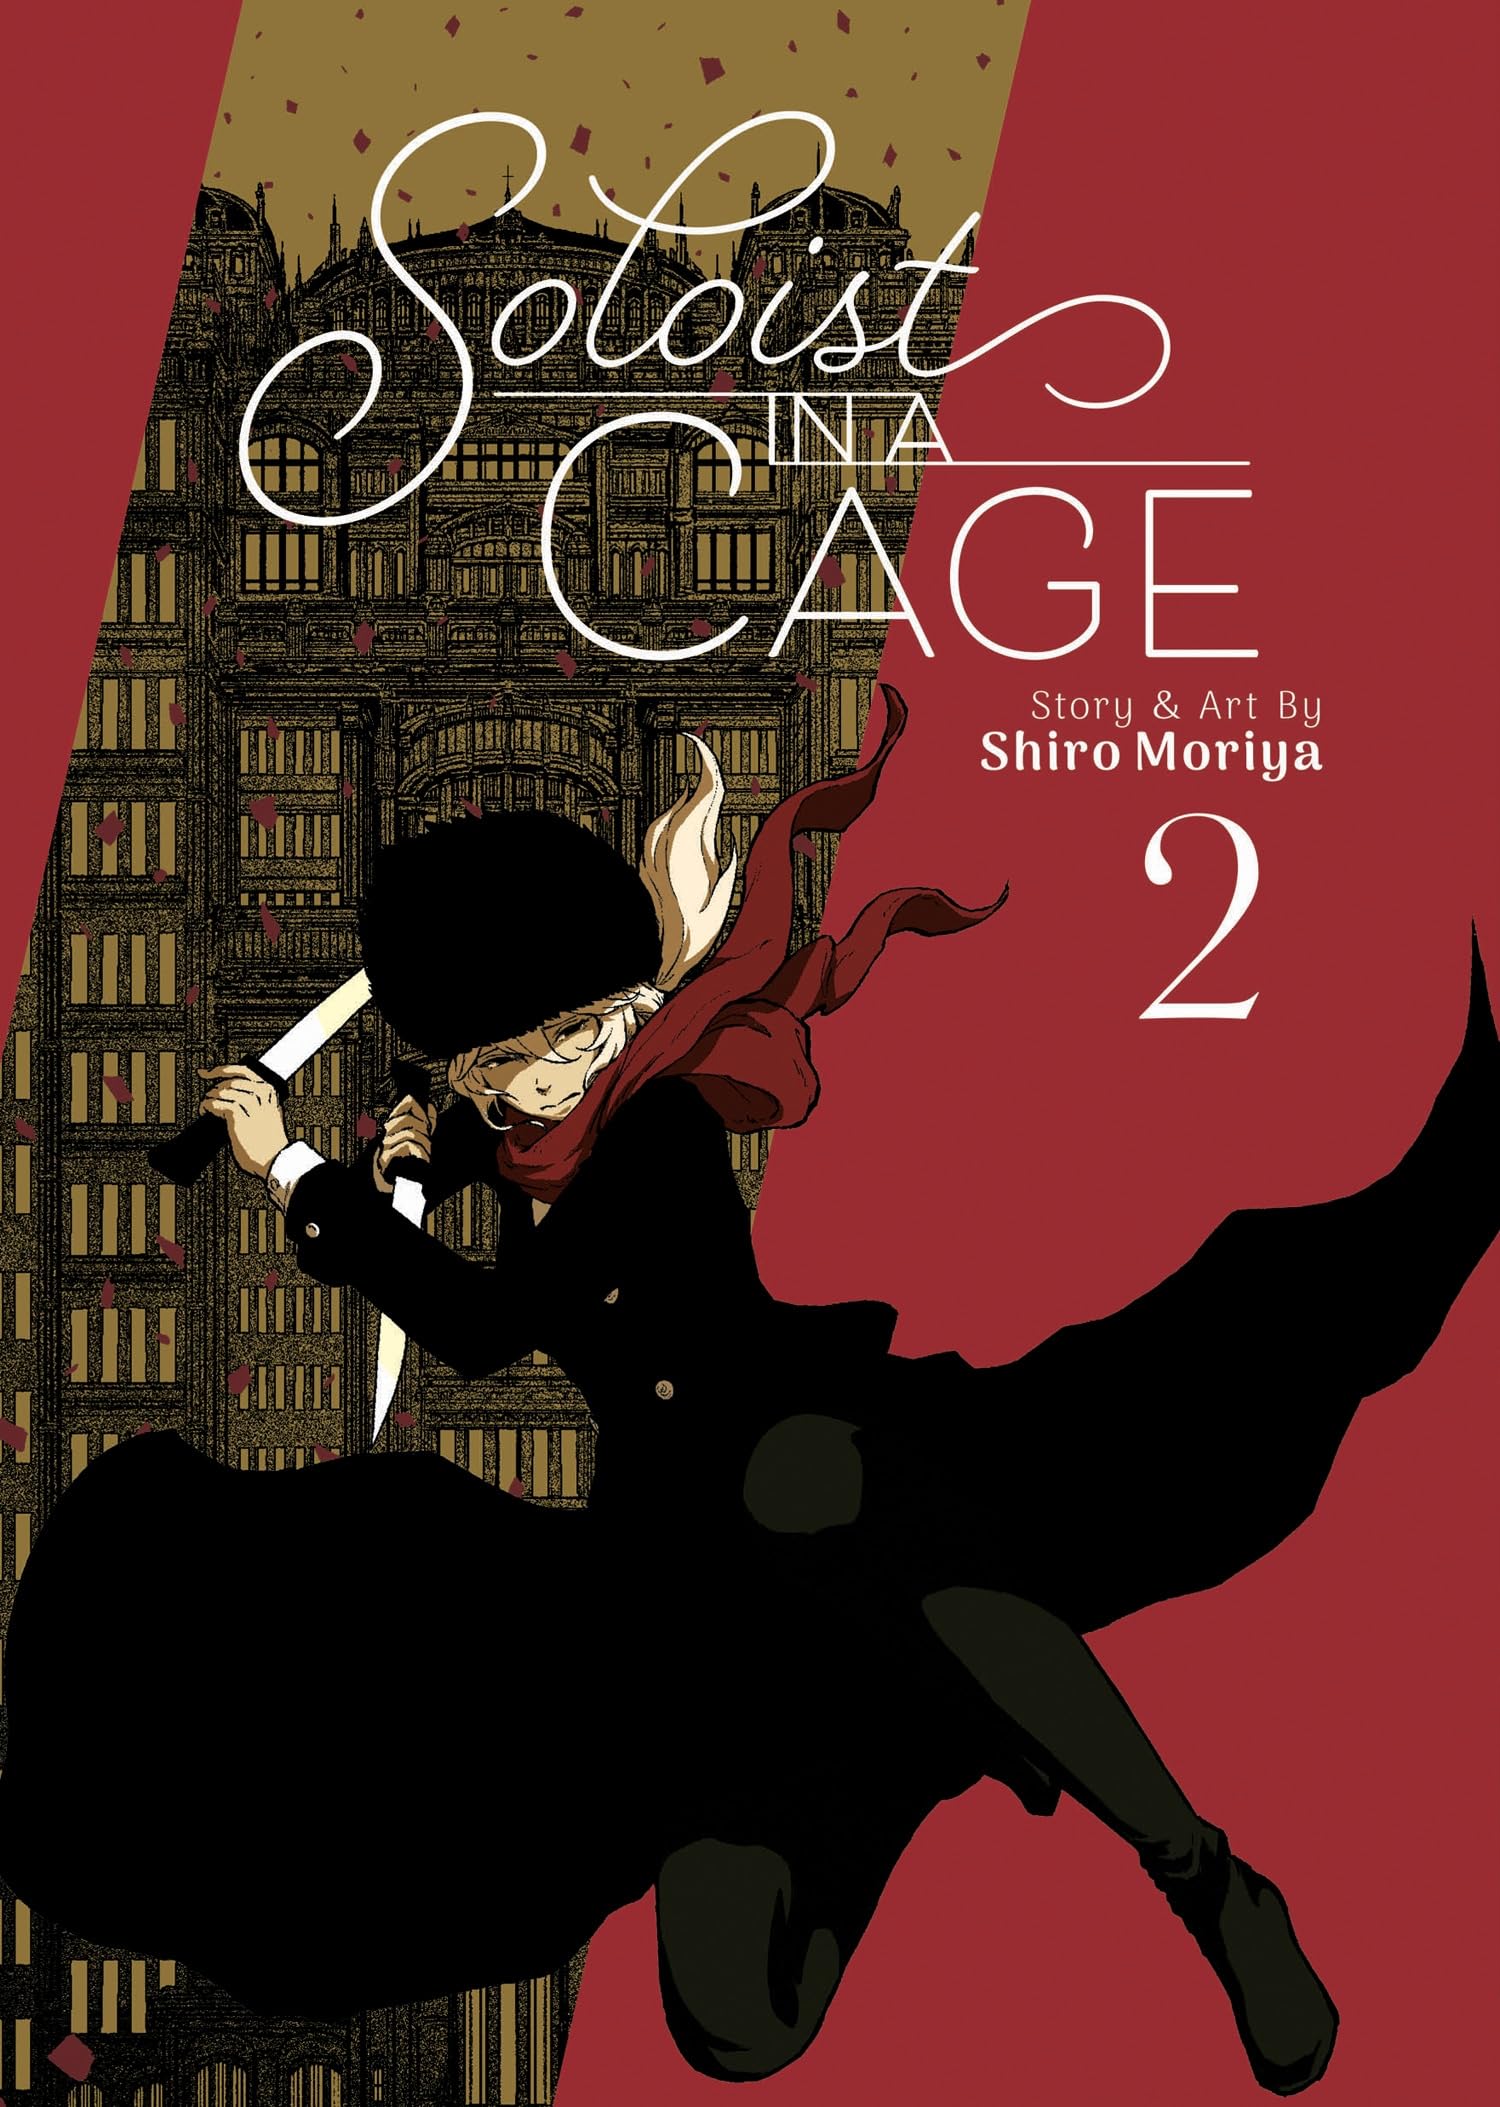 Soloist in a Cage Vol. 02